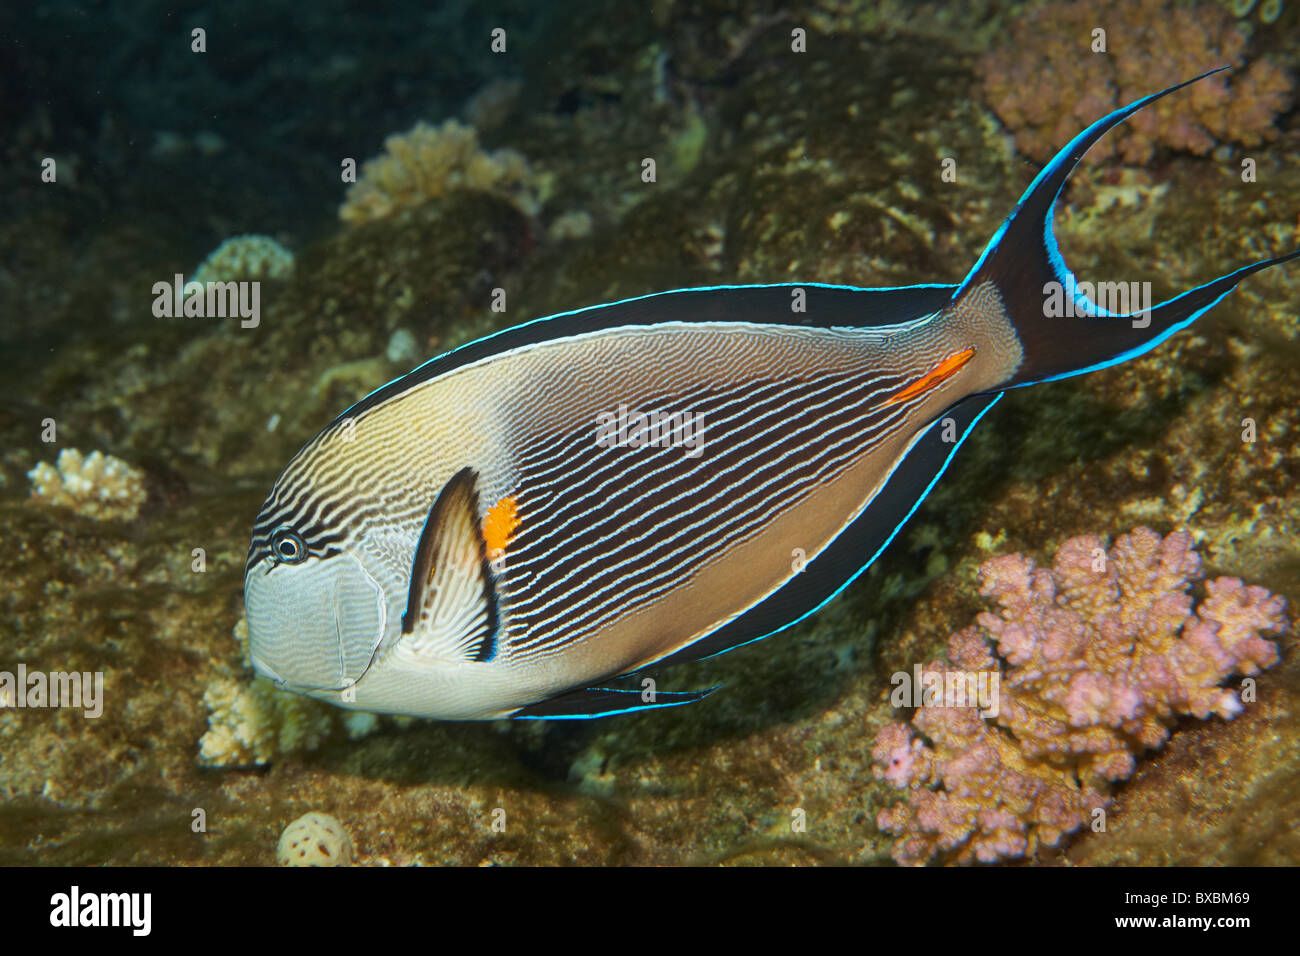 Surgeon fish - Acanthurus sohal - Acanthuridae - Coral reef in Red Sea Stock Photo